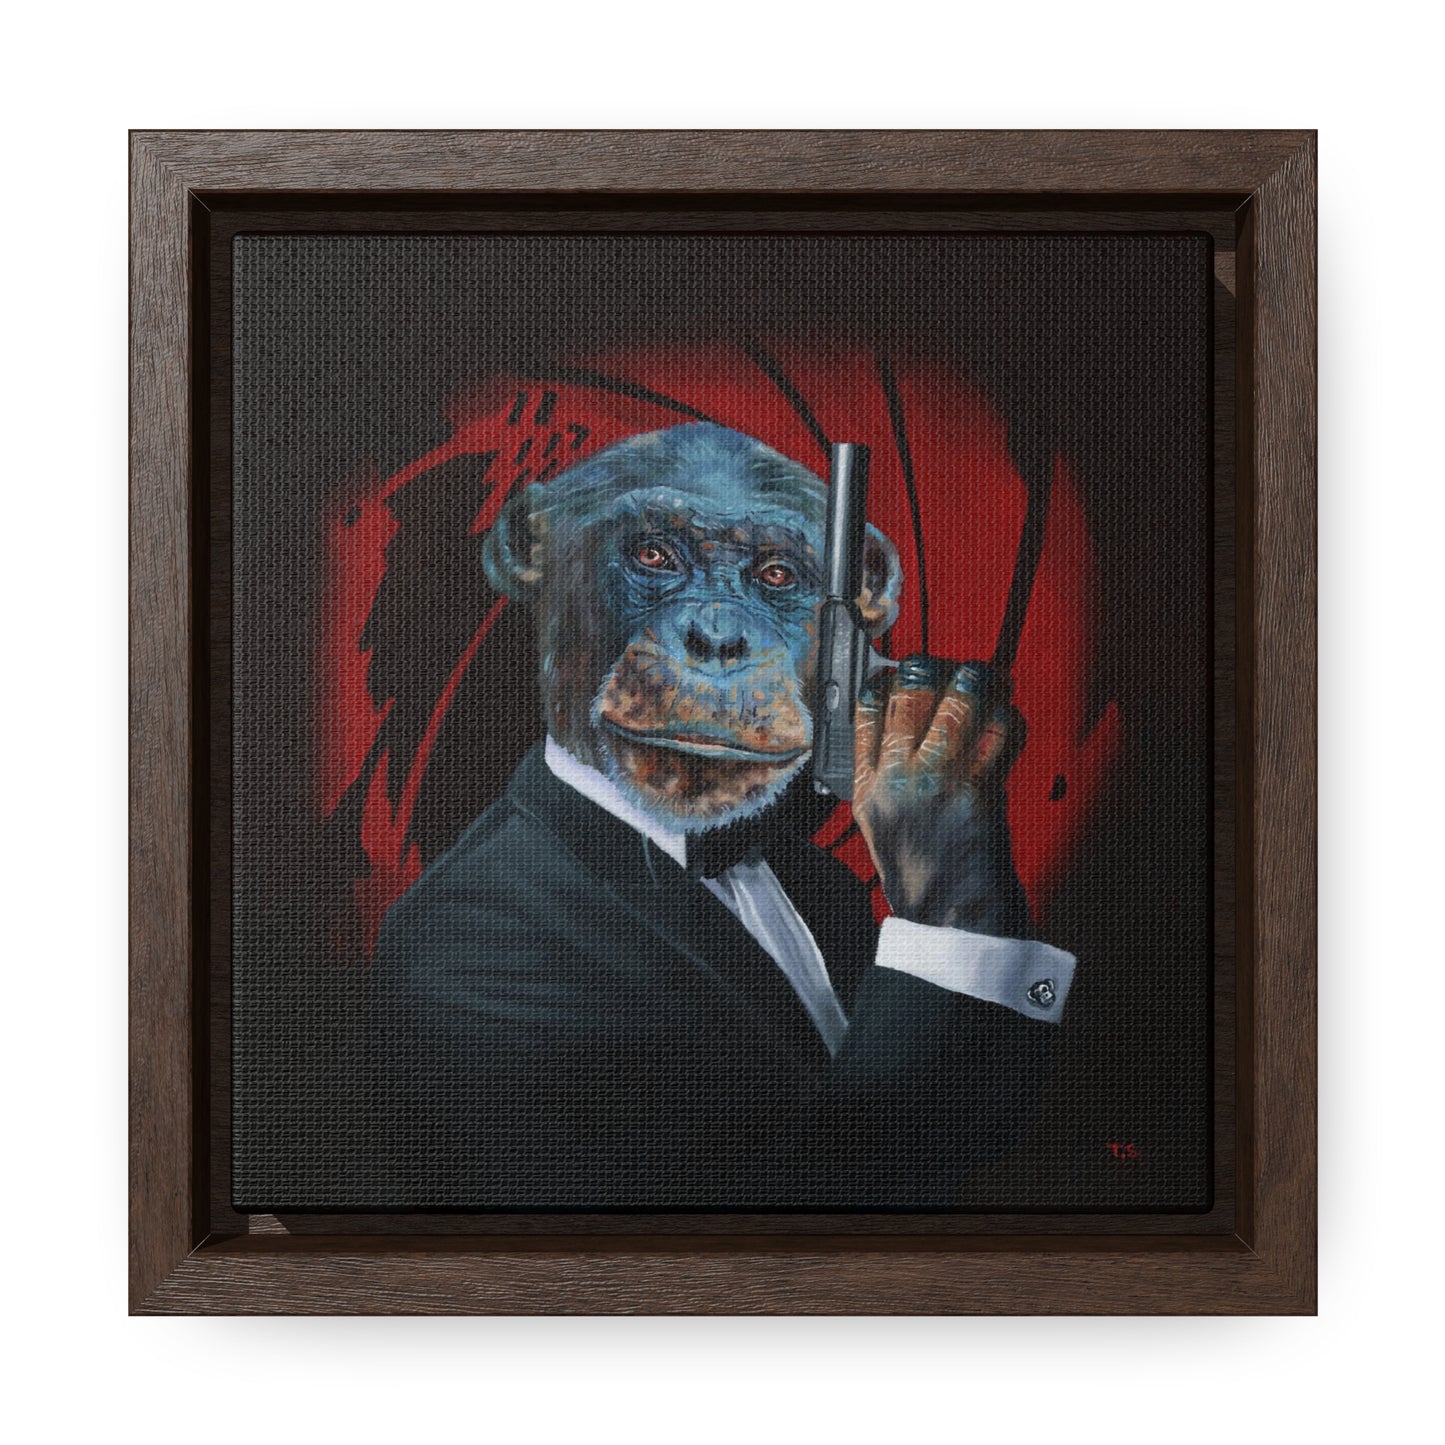 Tony South: "Shaken Not Stirred" - Framed Canvas Reproduction